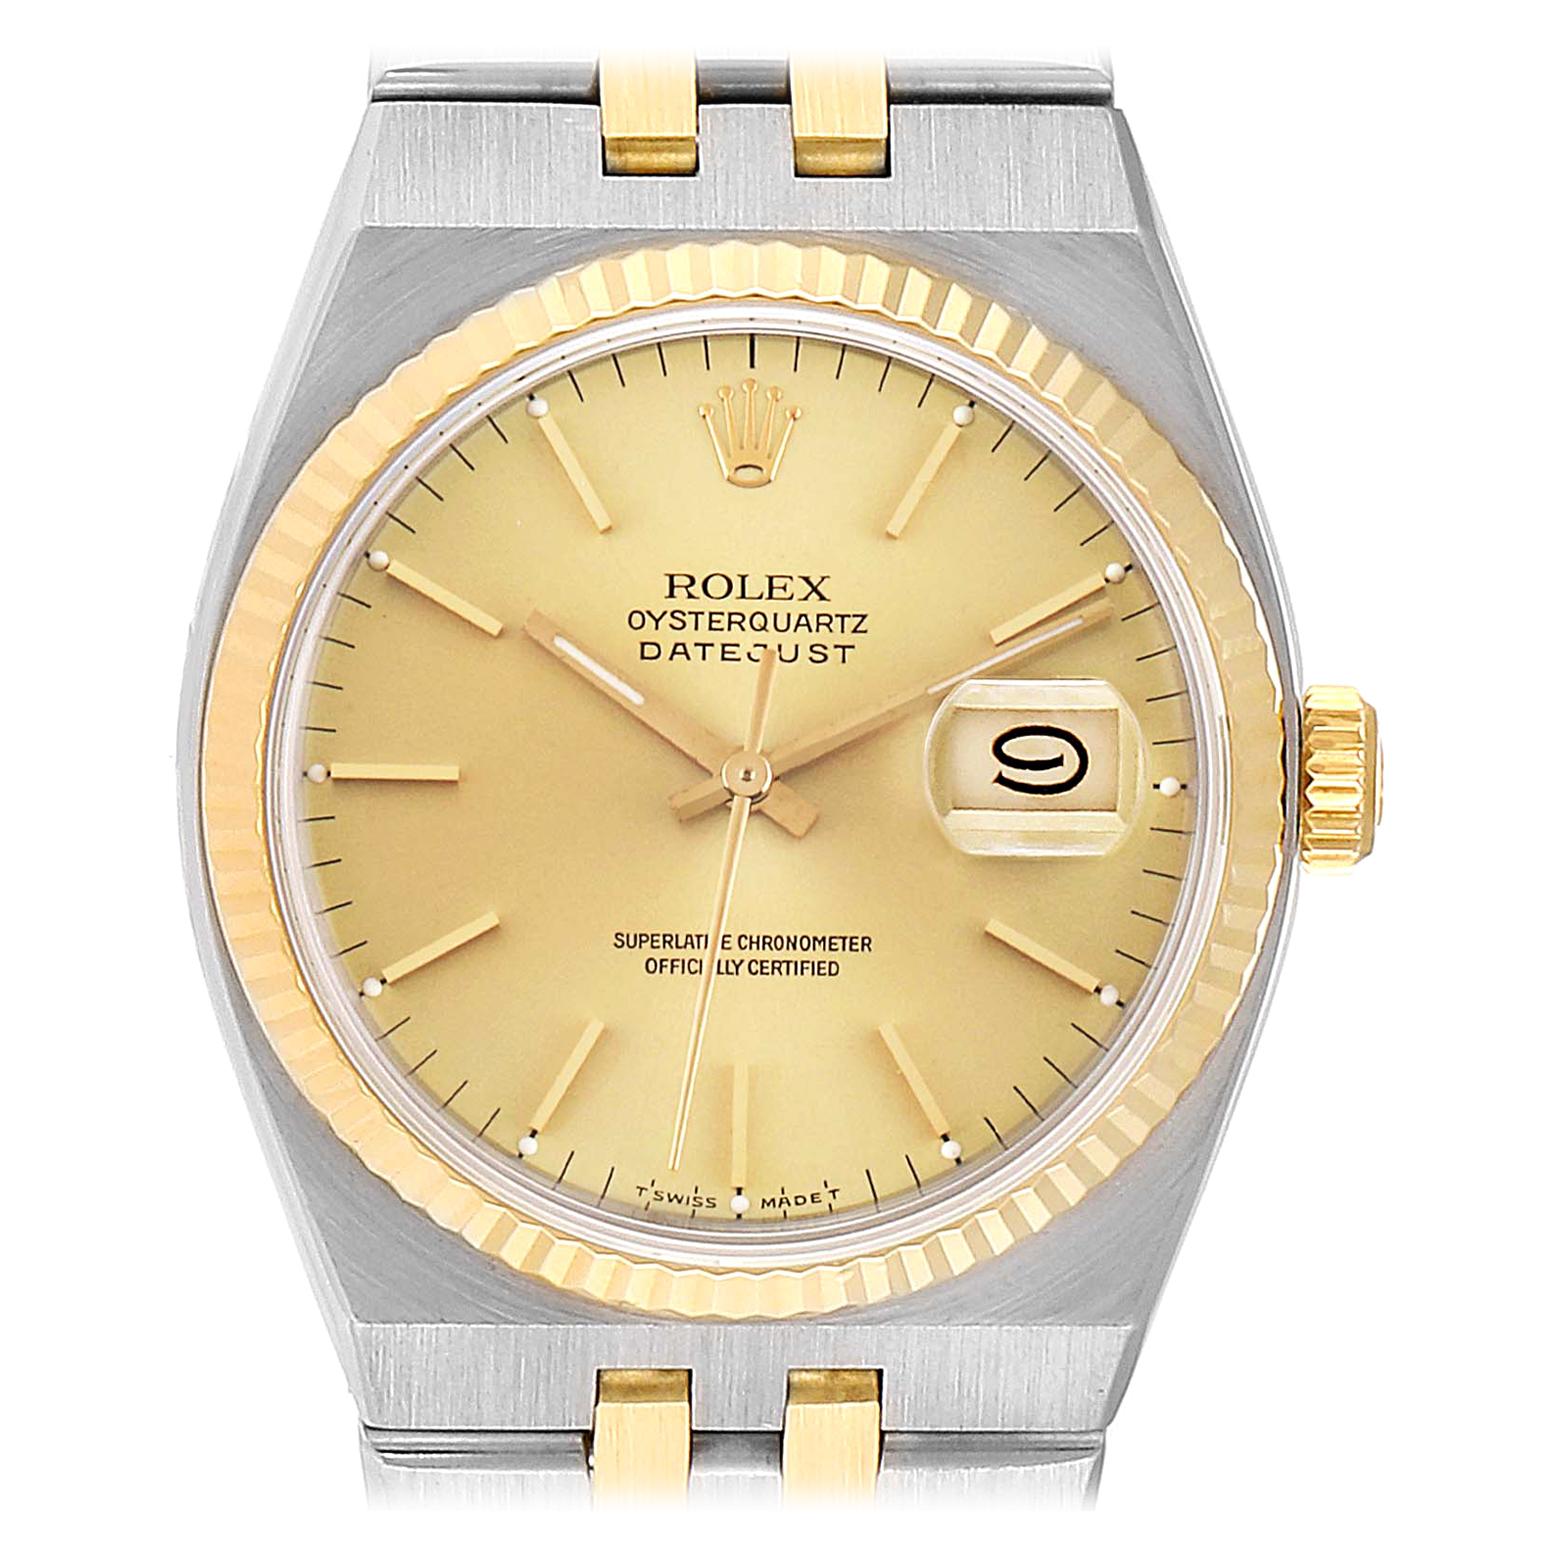 Rolex Oysterquartz Datejust Steel Yellow Gold Men's Watch 17013 Box Papers For Sale